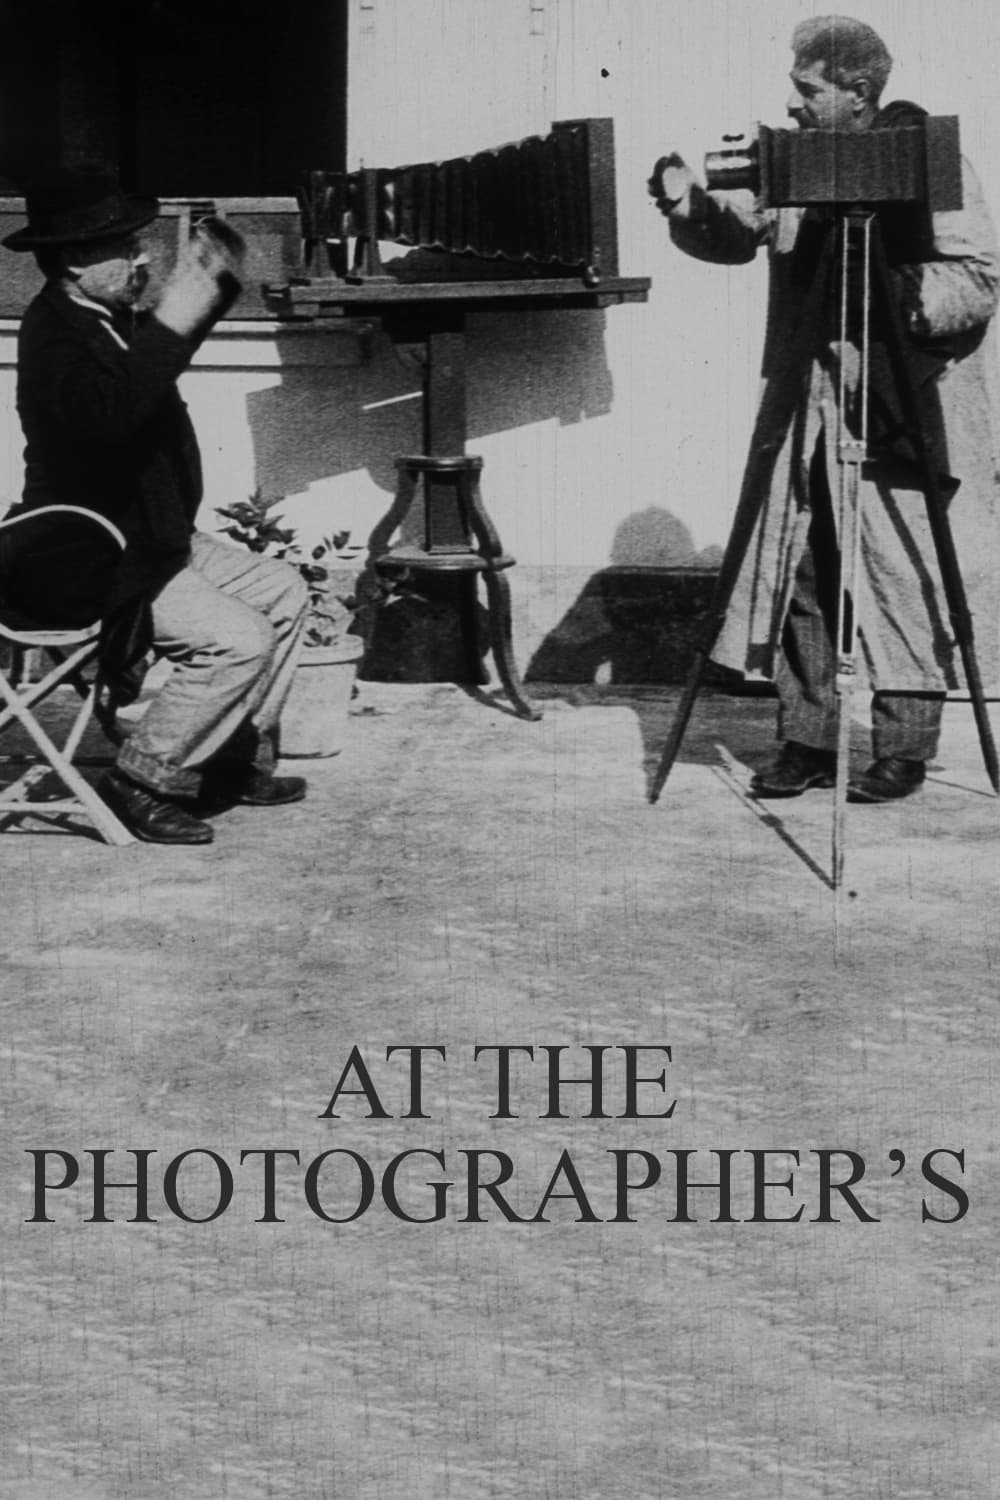 At the Photographer's